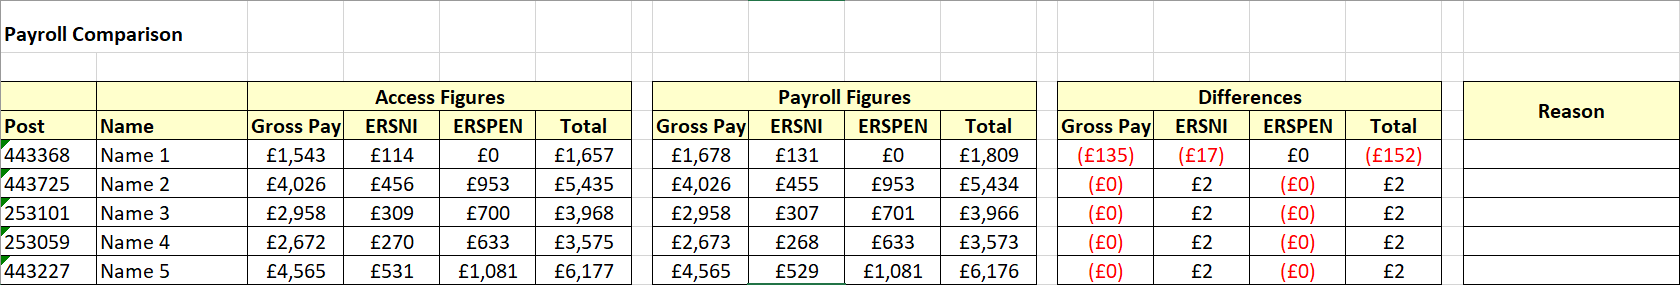 Example Payroll Comparison table.